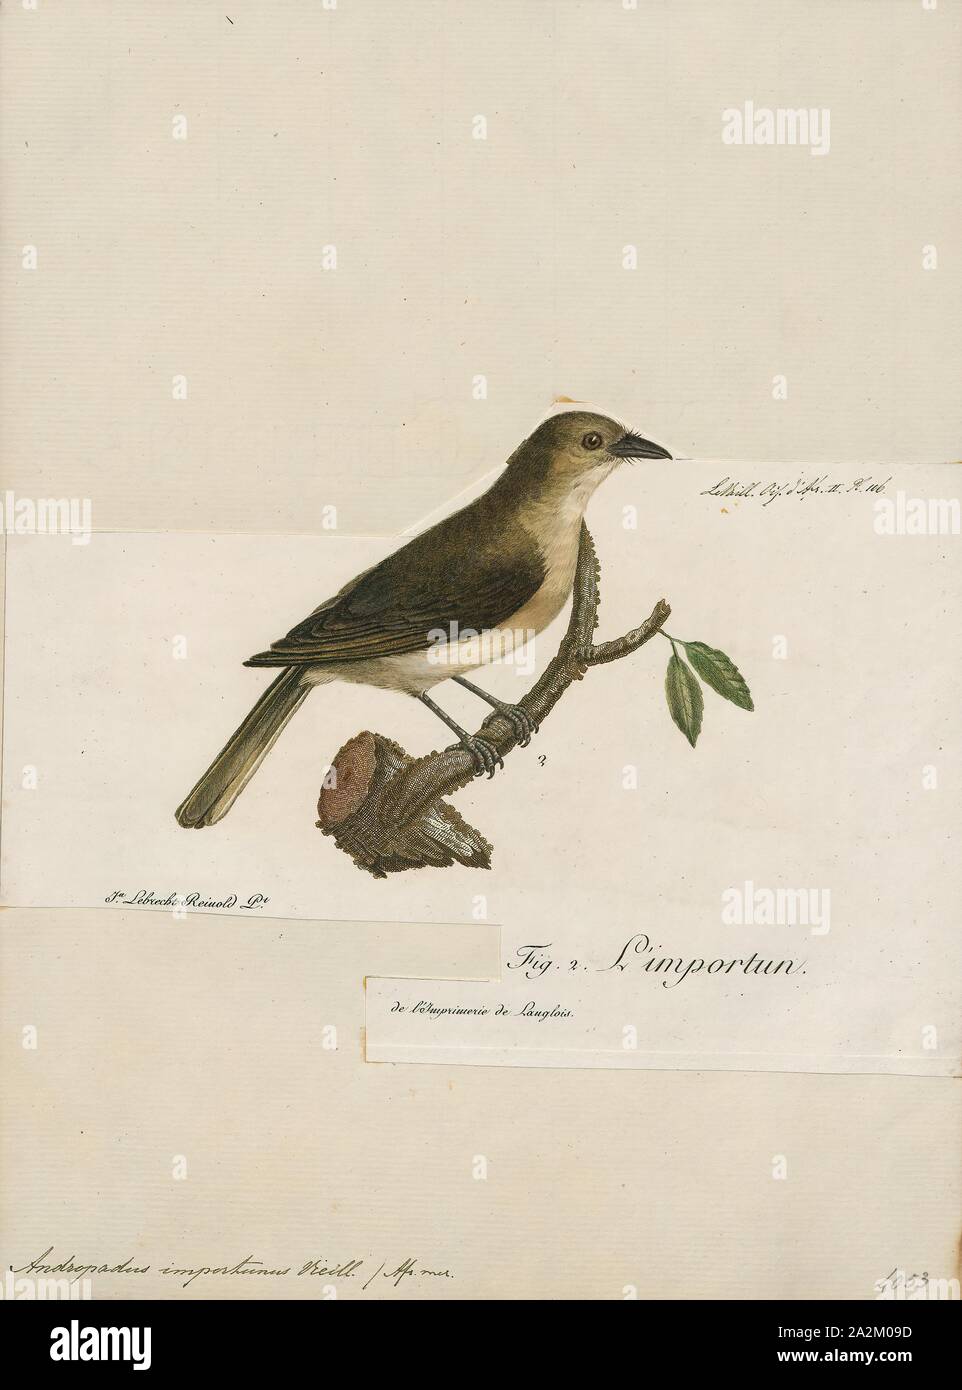 Andropadus importunus, Print, The sombre greenbul (Andropadus importunus) is a member of the bulbul family of passerine birds. It is a resident breeder in coastal bush, evergreen forest and dry shrub land in eastern and southern Africa. It is the only member of the genus Andropadus., 1796-1808 Stock Photo